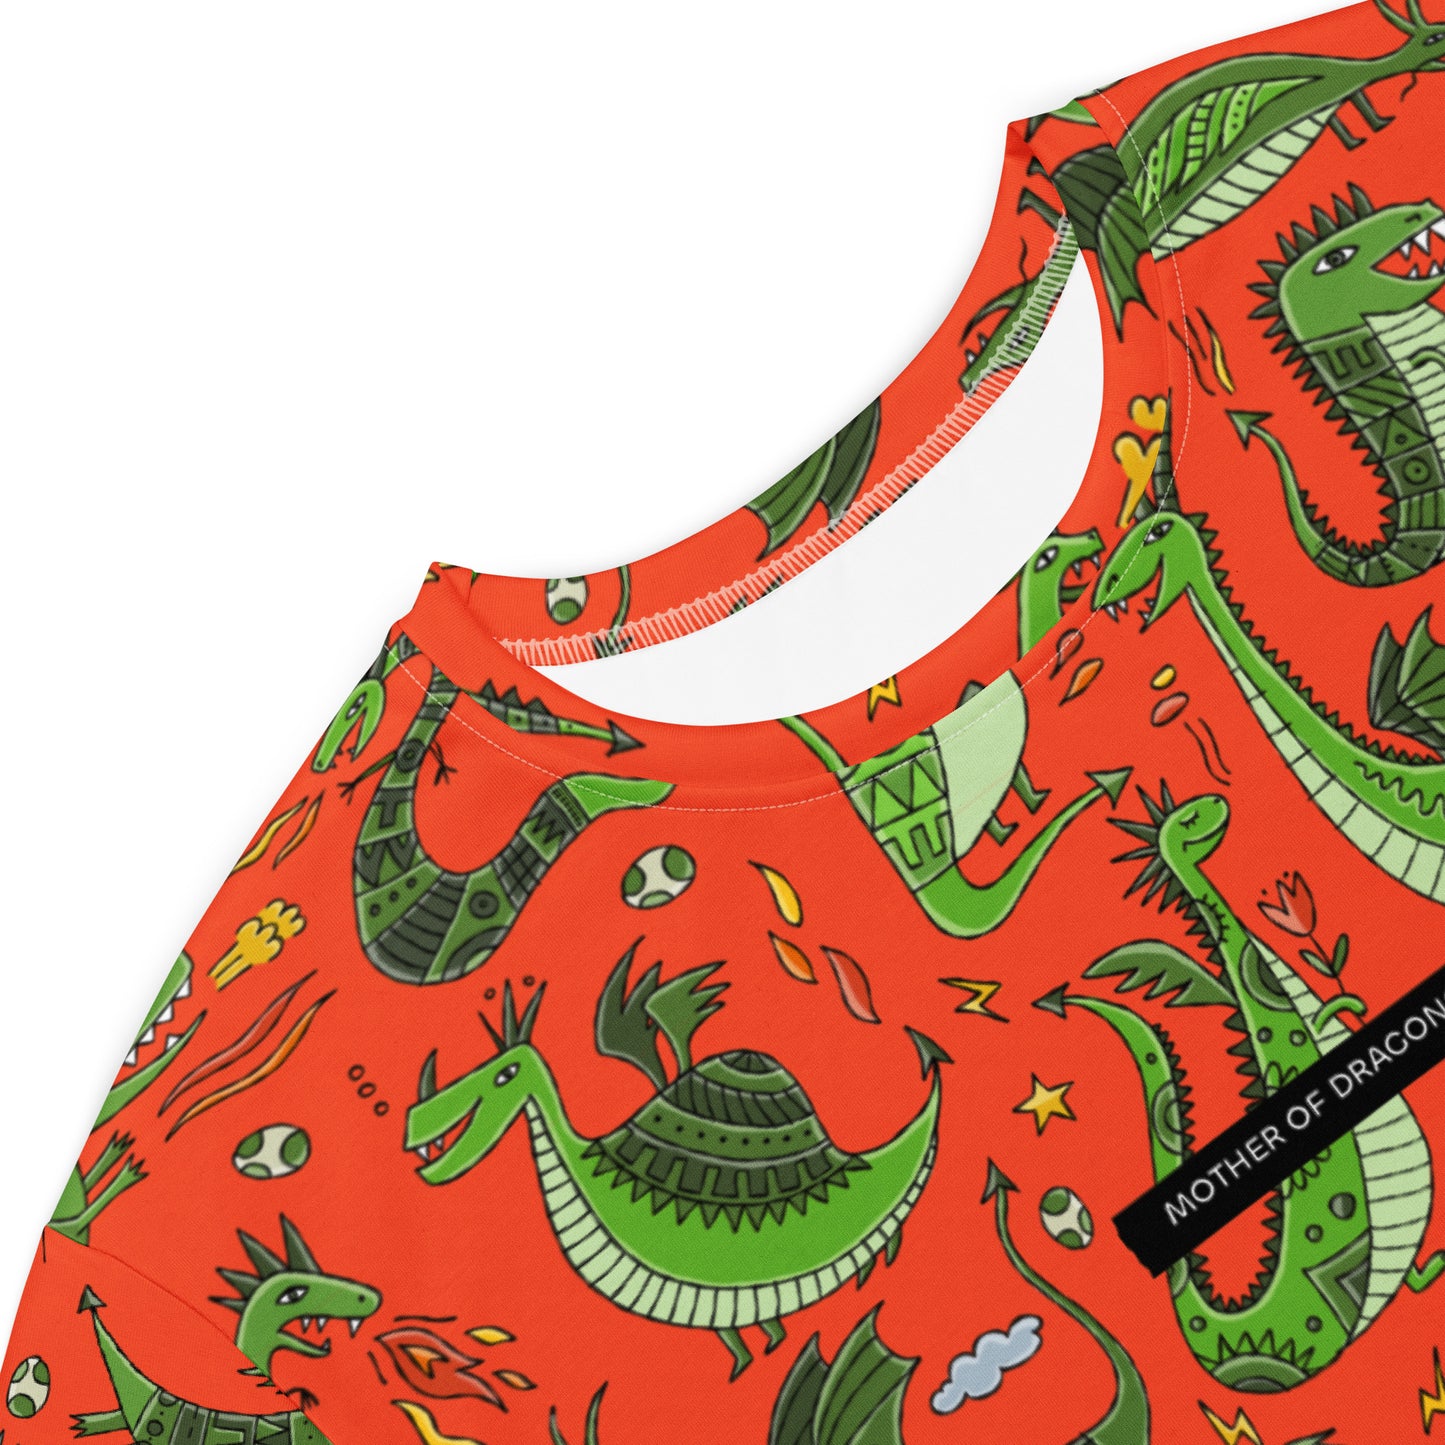 T-shirt dress personalised with funny green dragons on red. Basic text - Mother of Dragons. Close Up